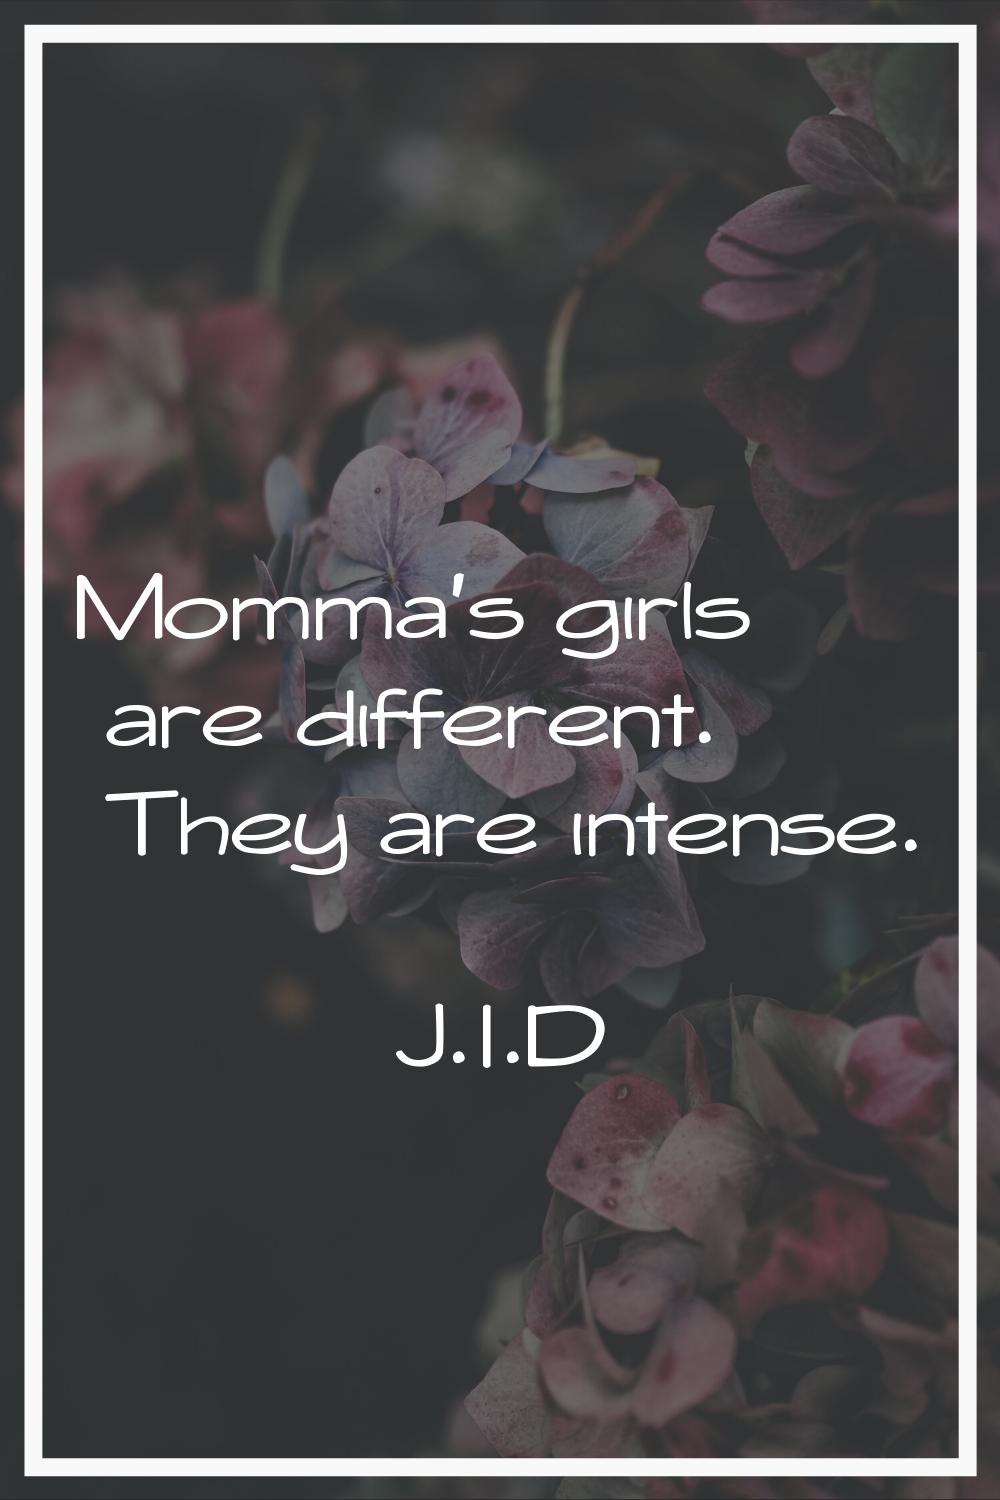 Momma's girls are different. They are intense.